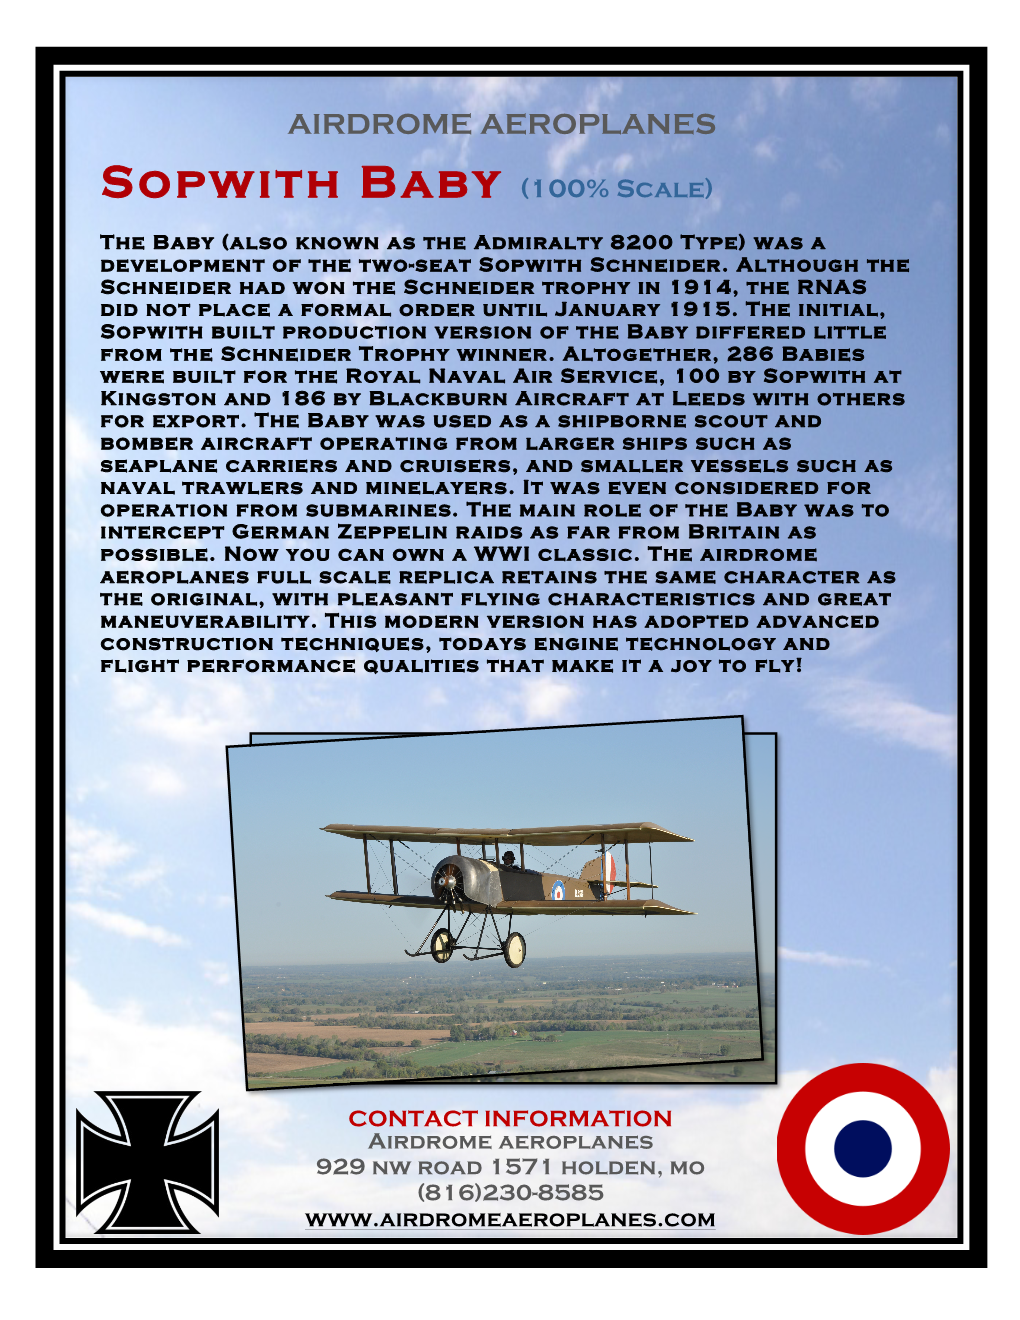 Sopwith Baby (100% Scale)